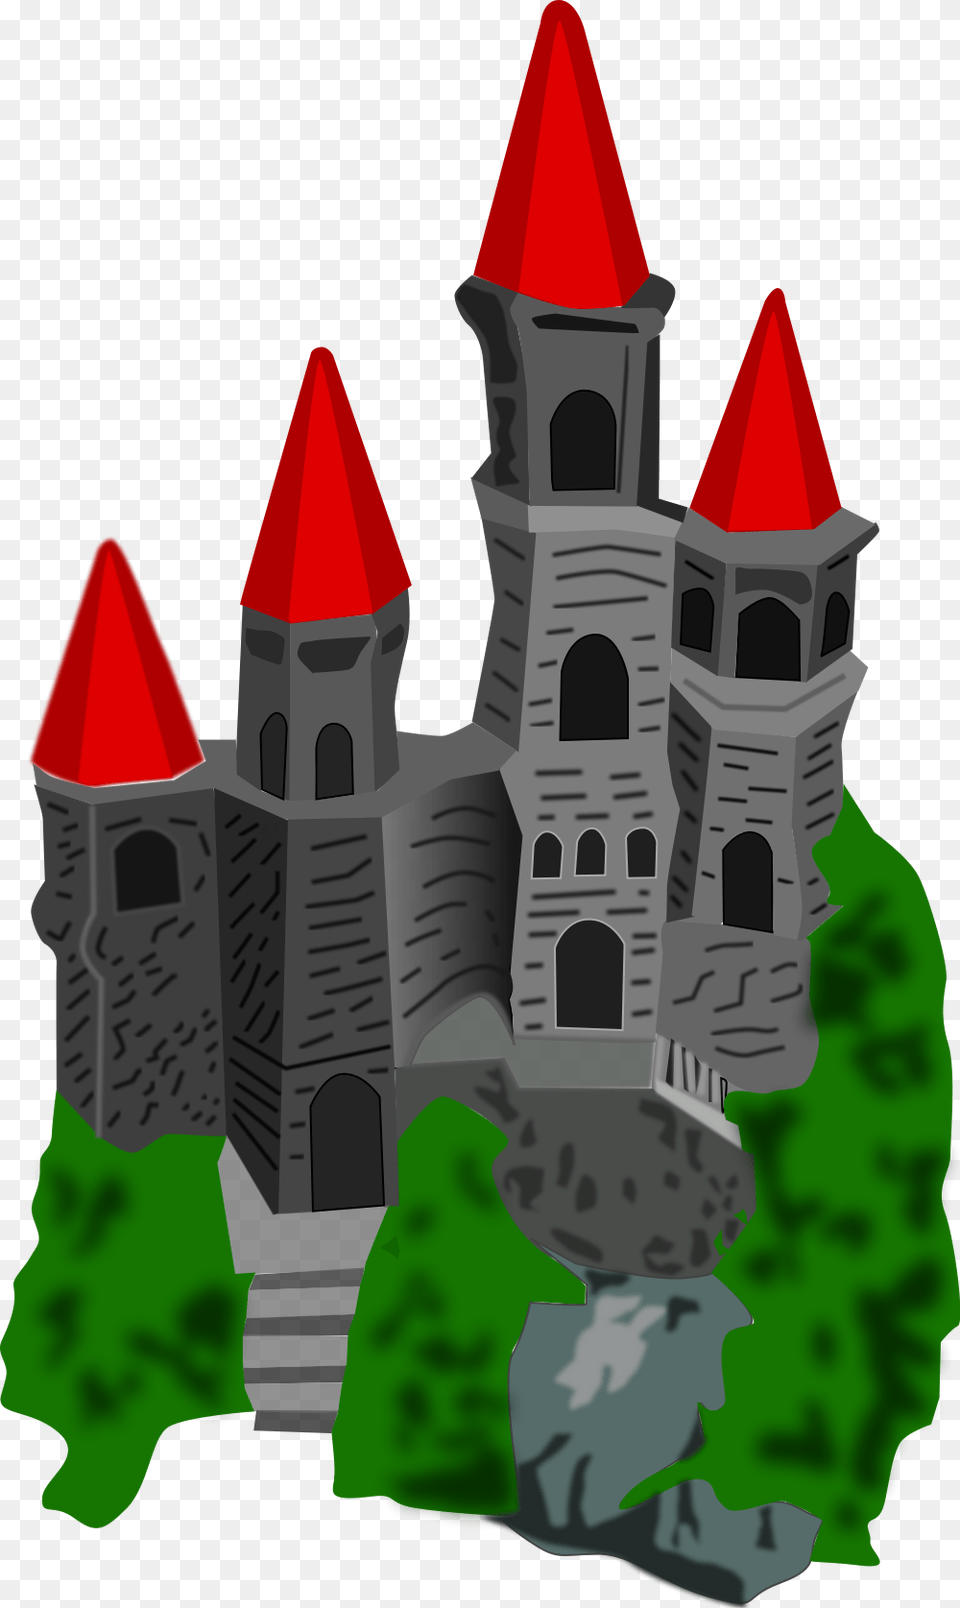 Castle, Architecture, Building, Spire, Tower Png Image